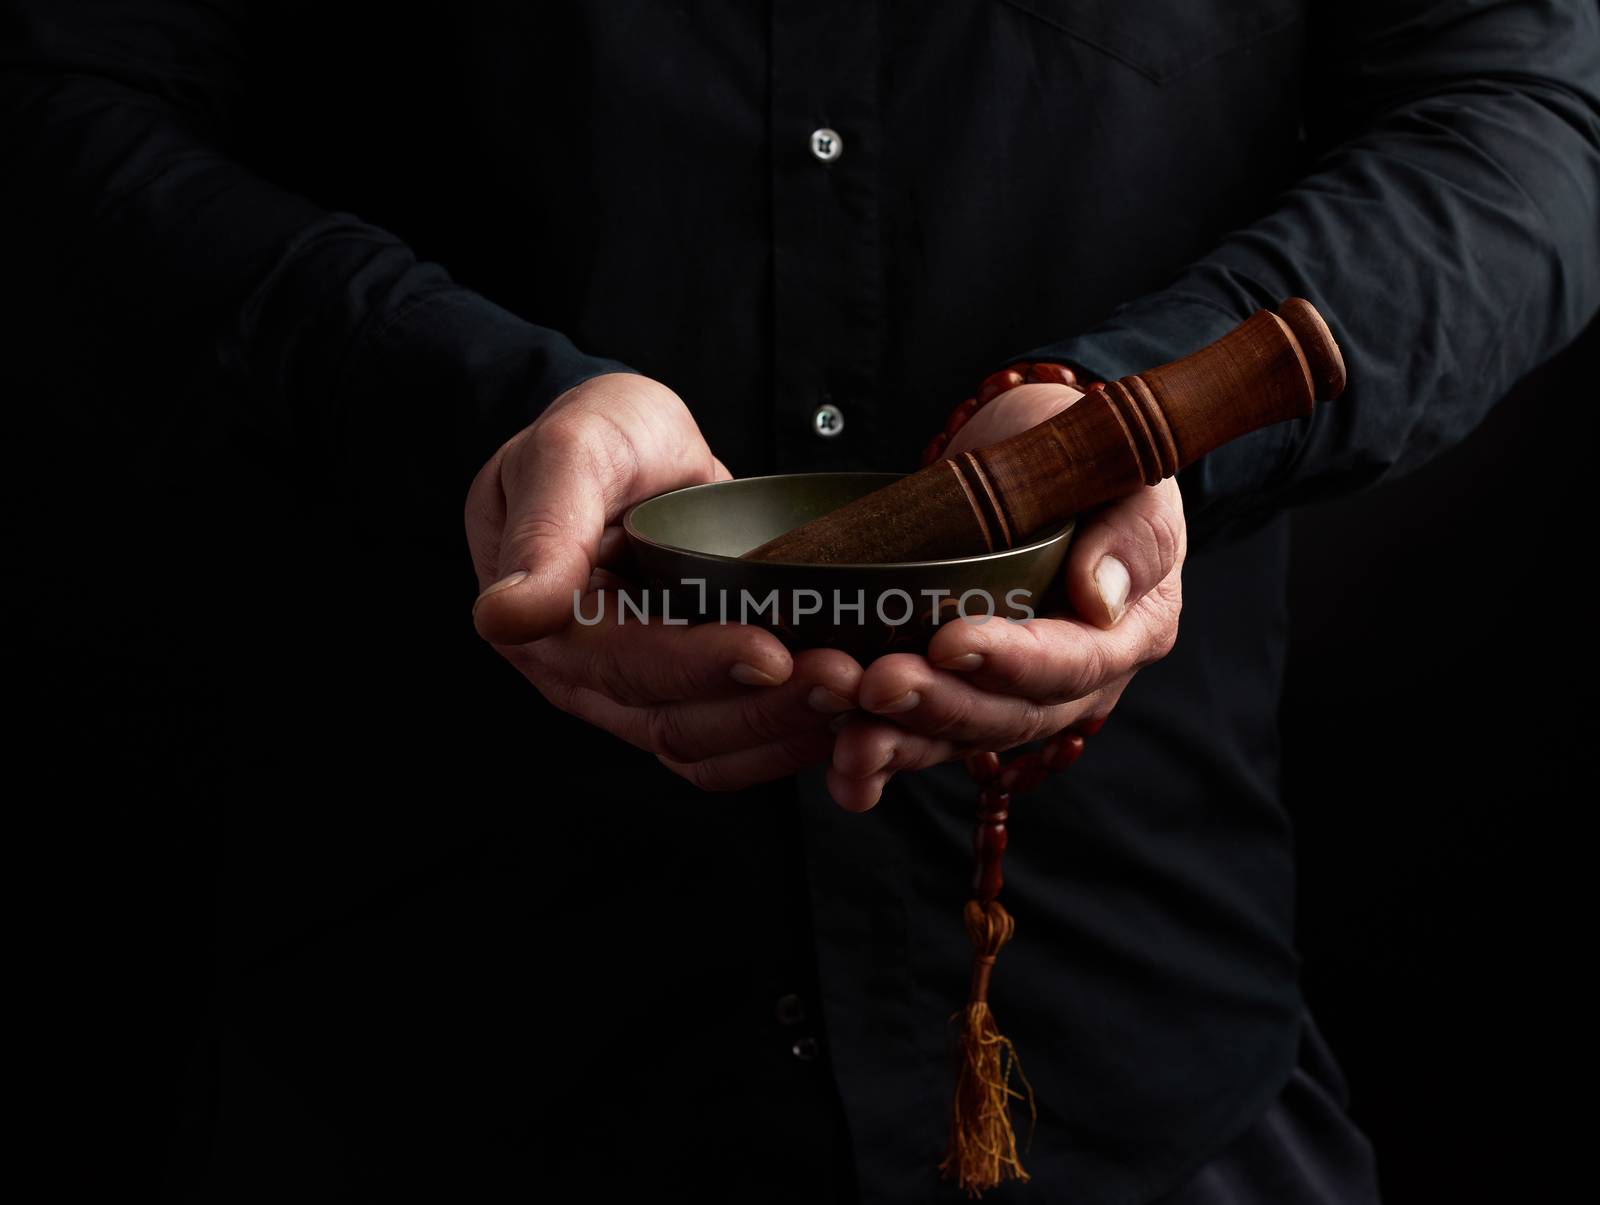 man in a black shirt holds a Tibetan brass singing bowl and a wooden stick, a ritual of meditation, prayers and immersion in a trance. Alternative treatment